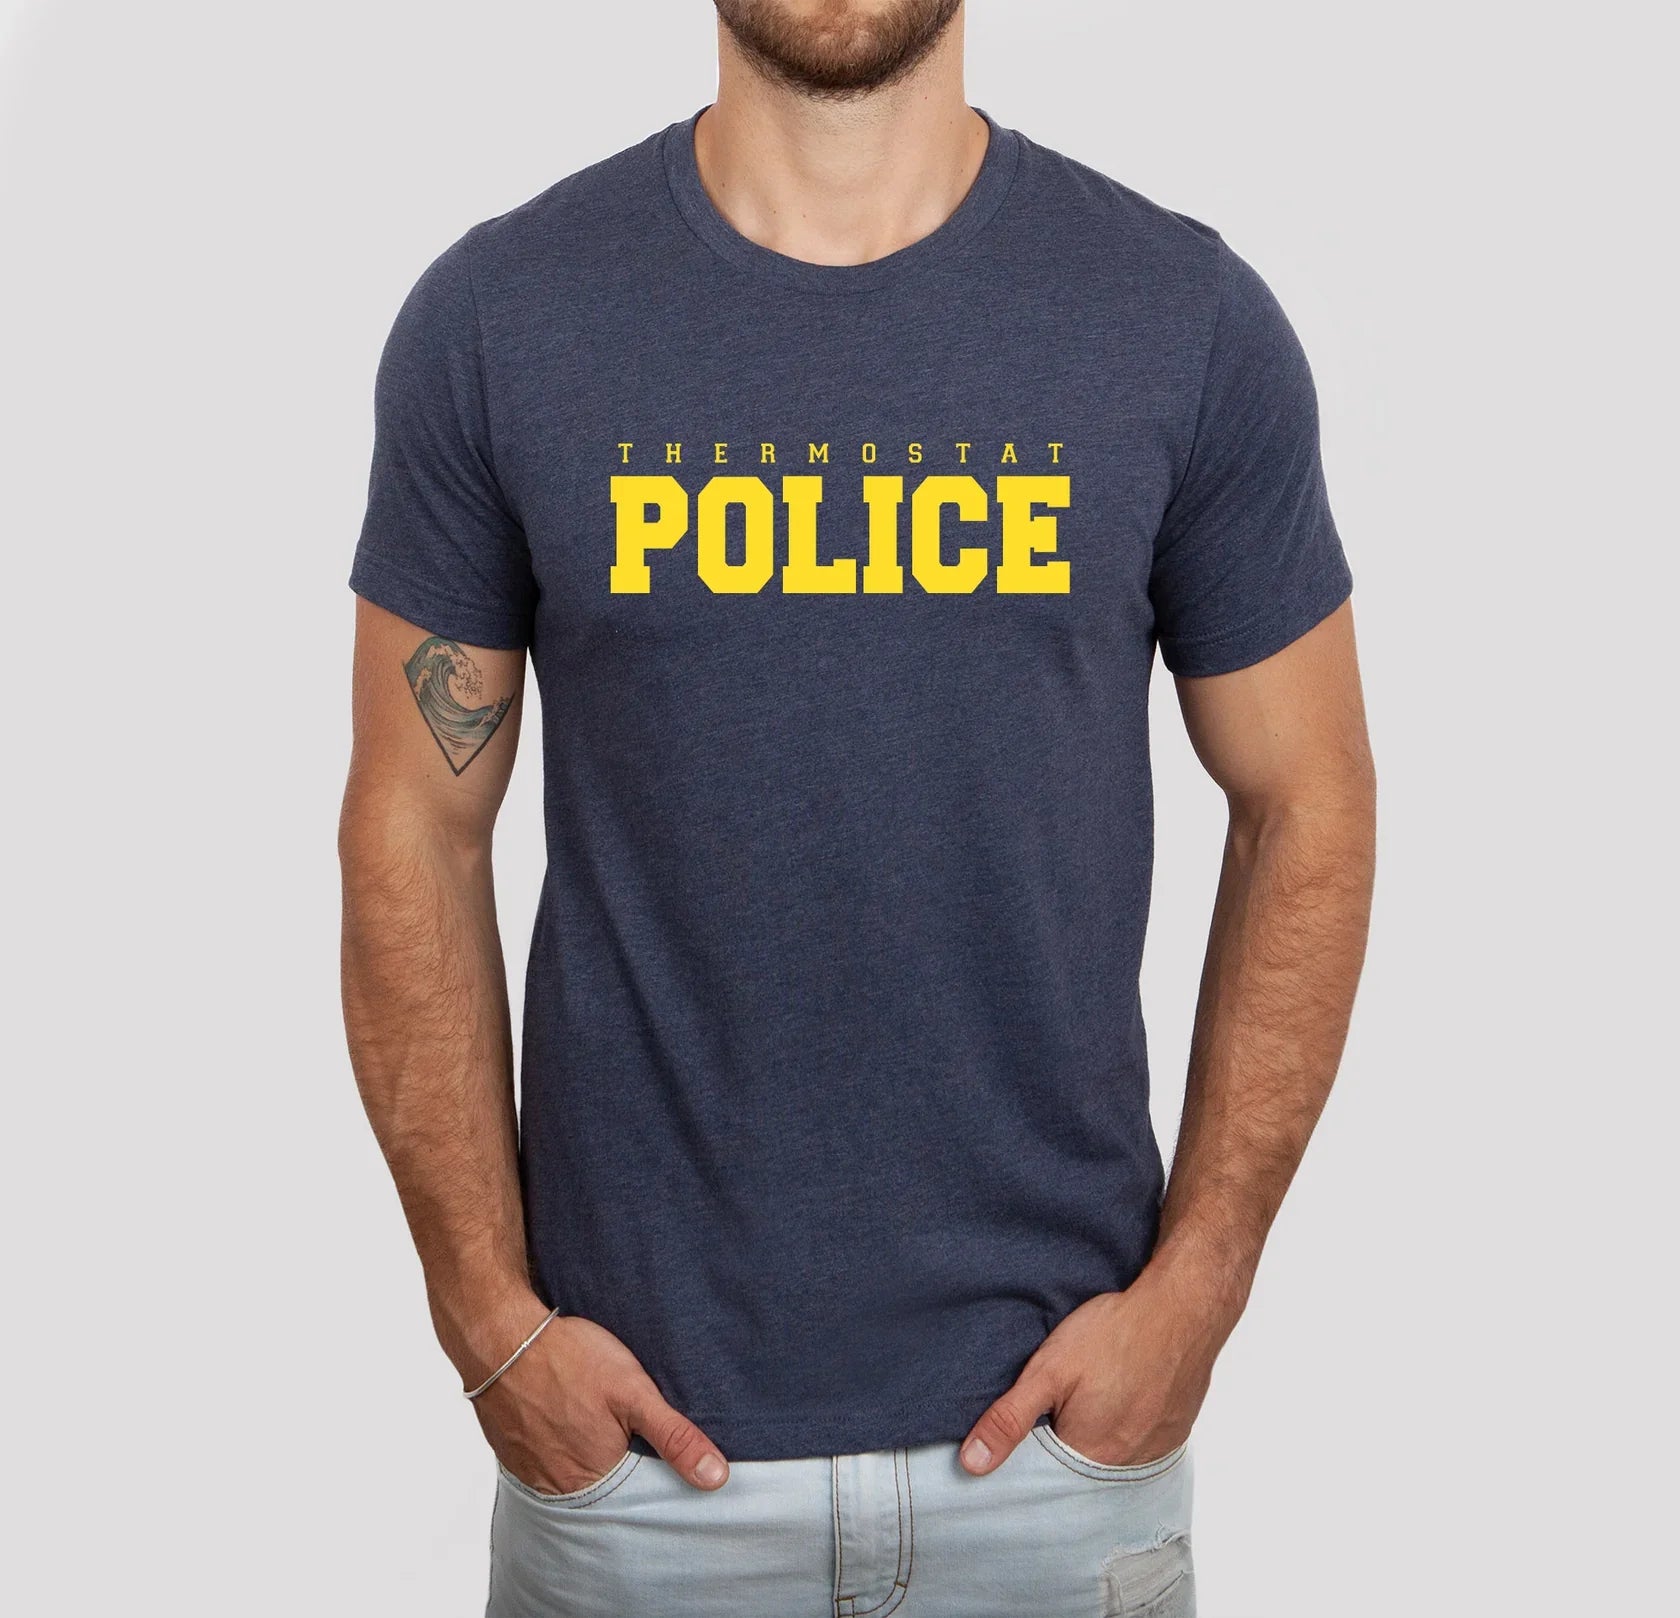 PREORDER: Thermostat Police Graphic Tee (Ships Early June)